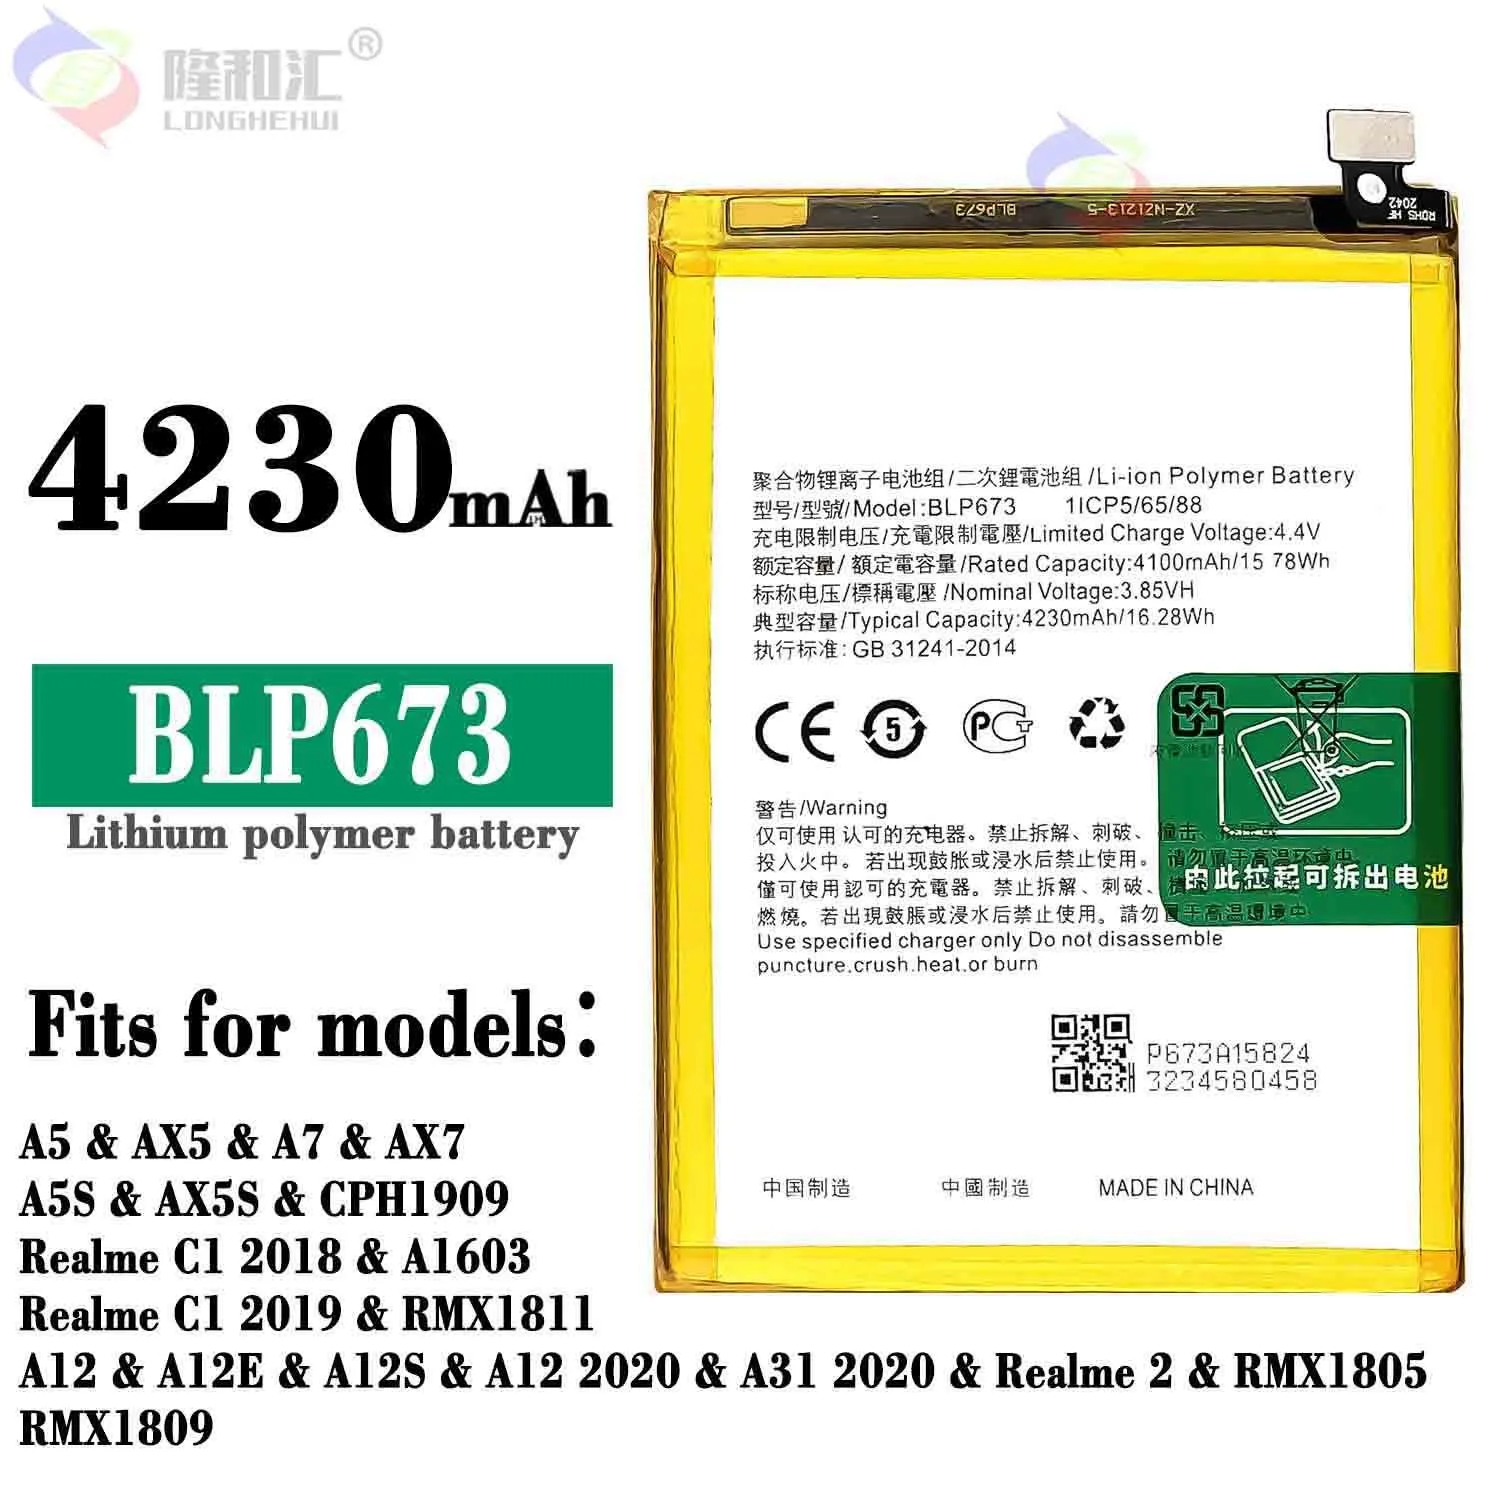 New BLP673 4230mAh Battery for OPPO A3s A5 A5s AX7 Smart Phone High Quality Batterie enlarge